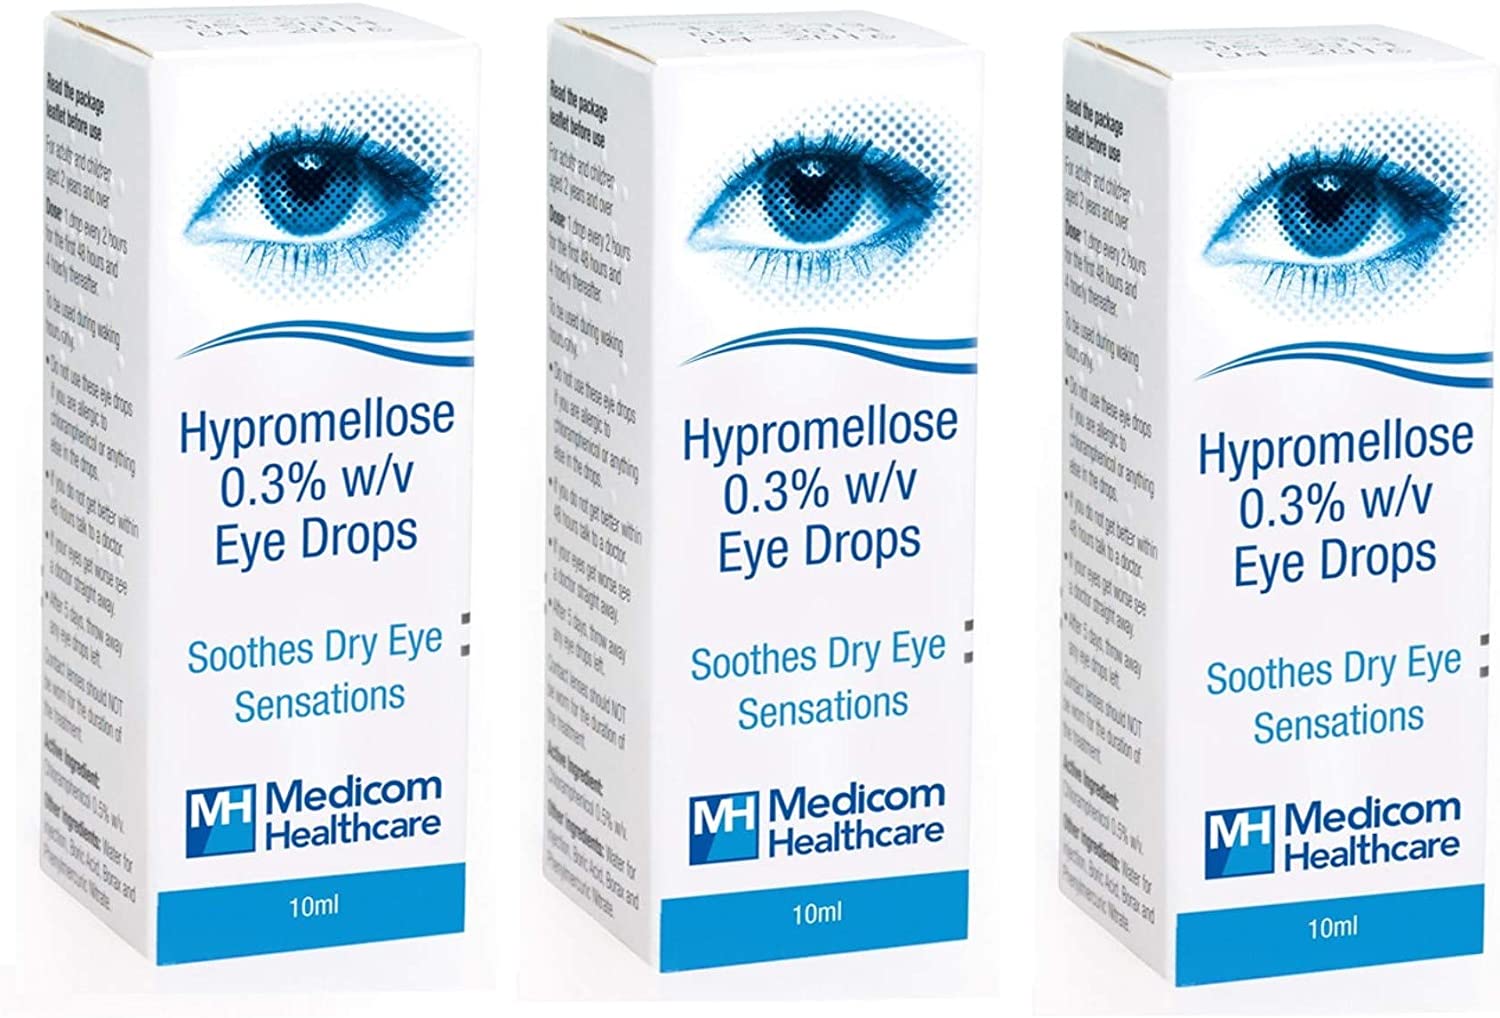 Hypromellose Eye Drops 0.3% - 10ml - Pack of 3 (Brand May Vary)